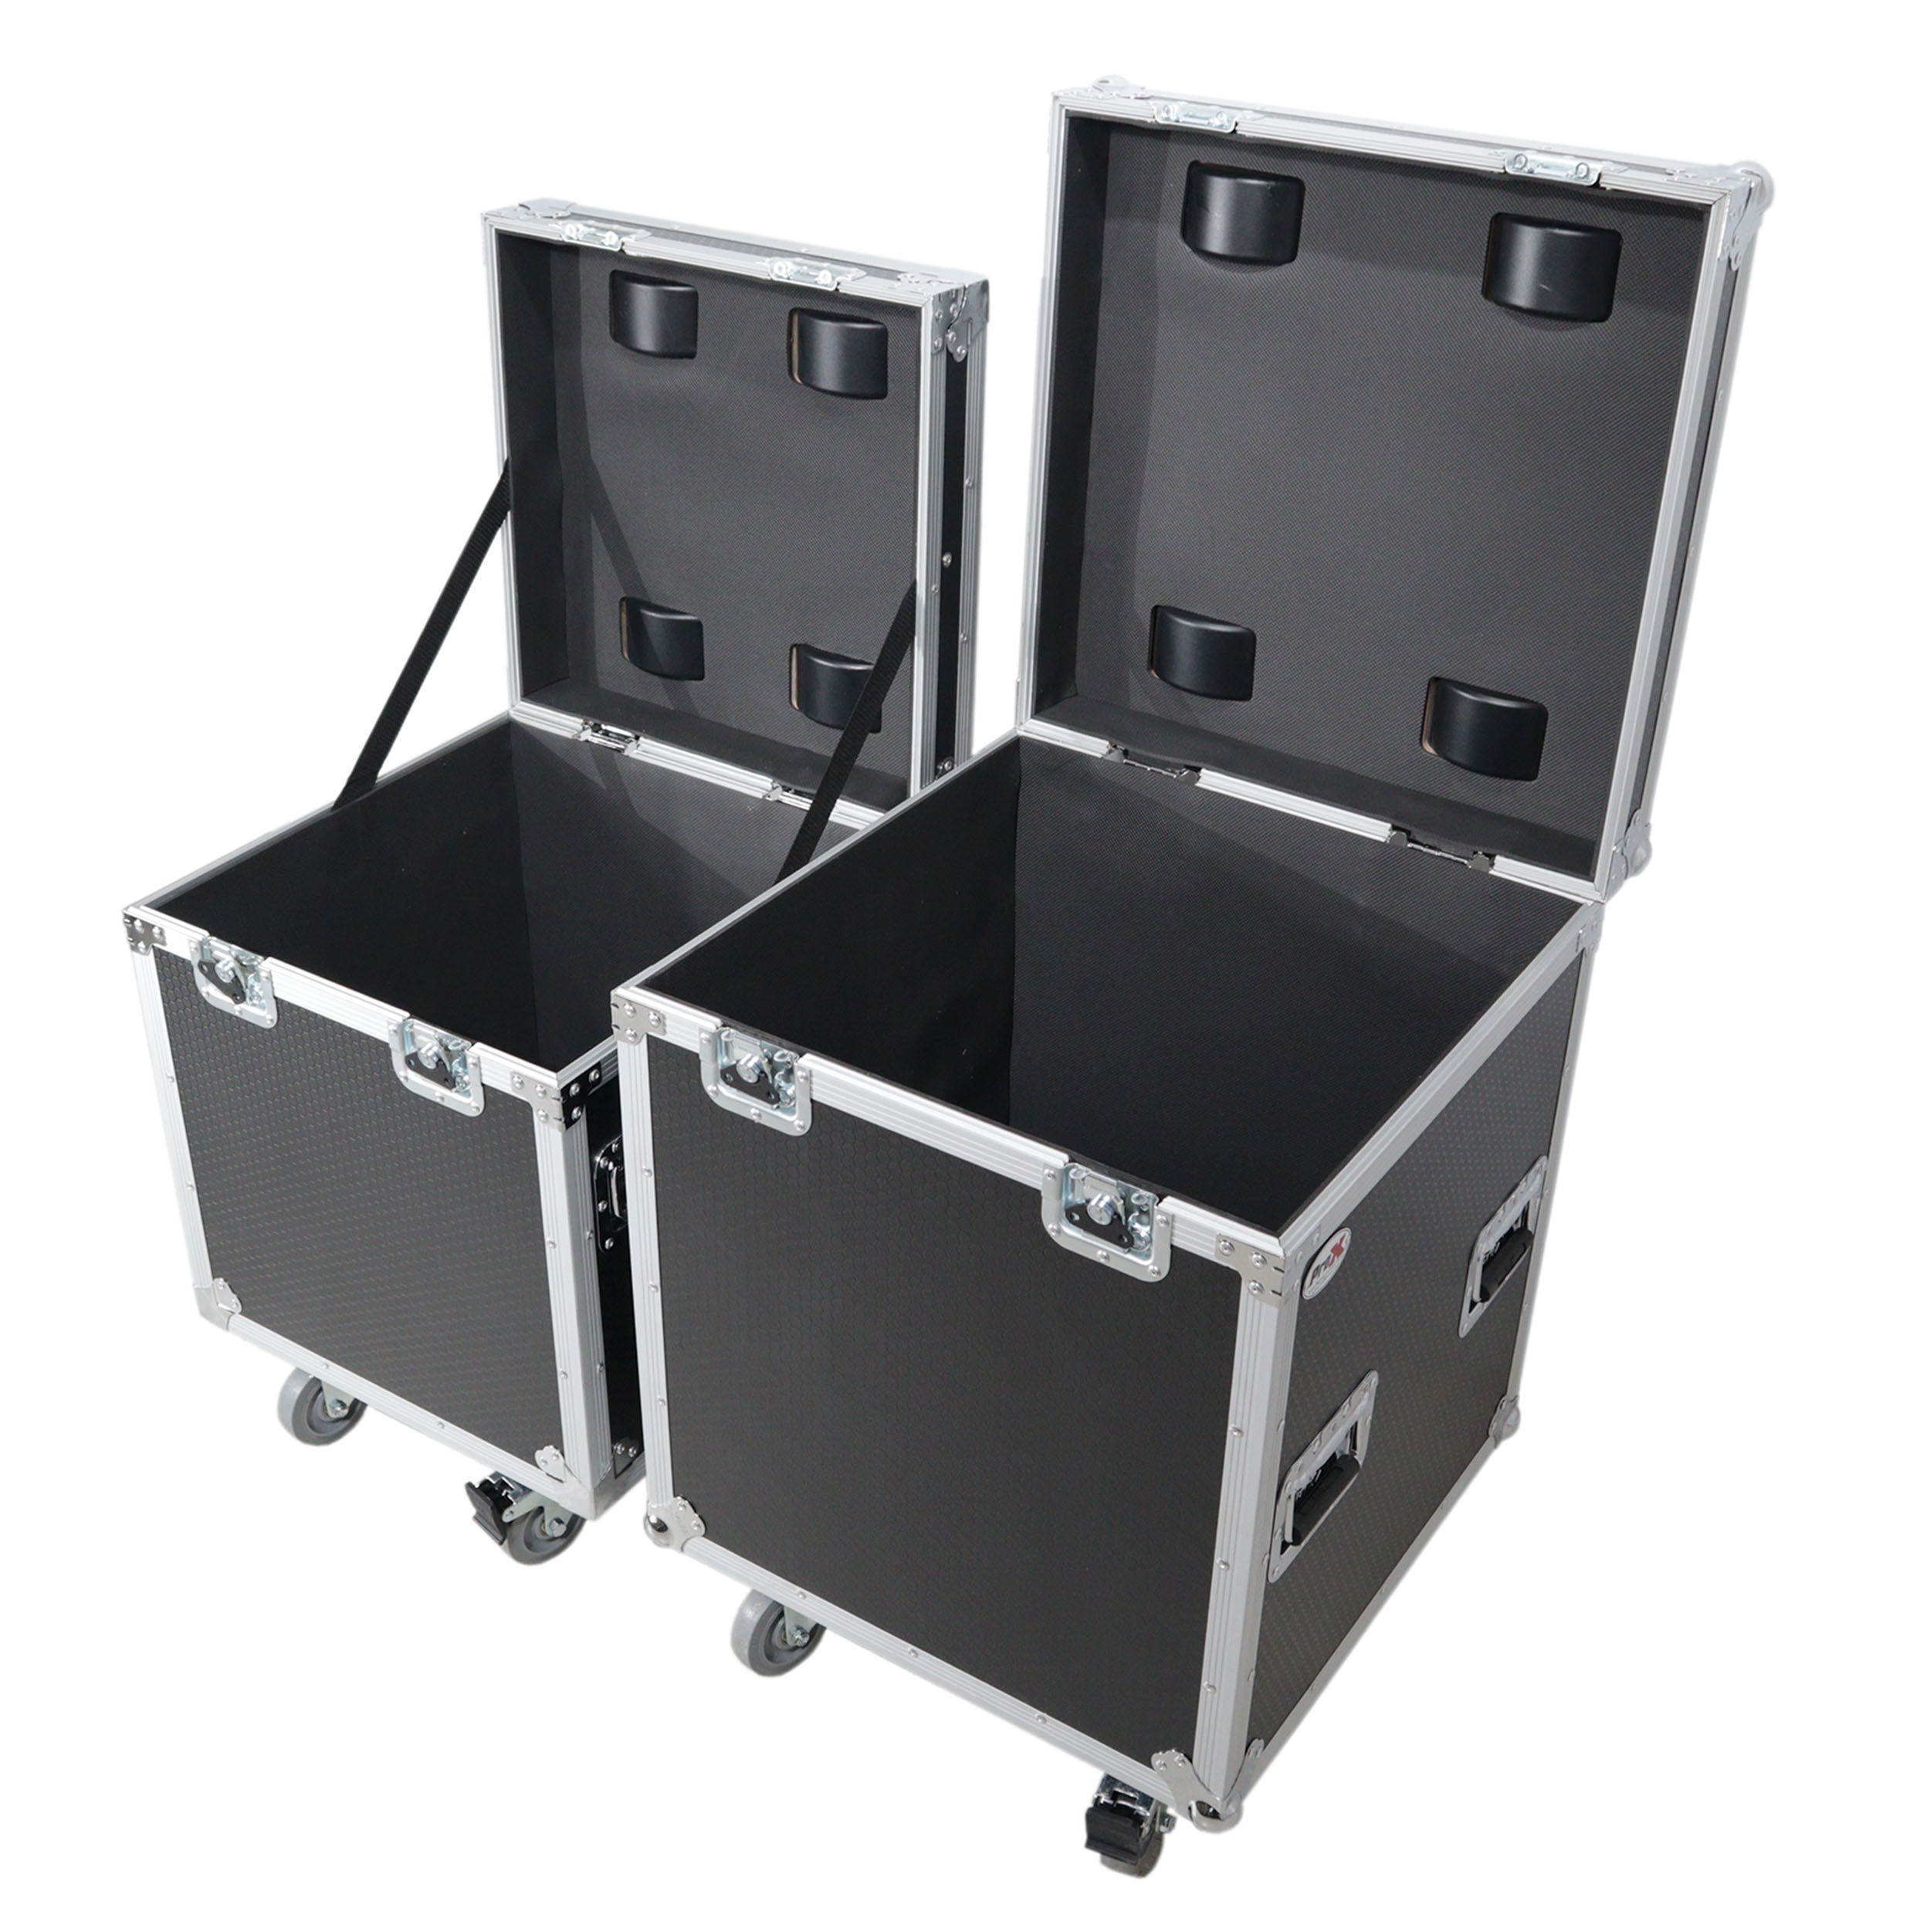 Pro X Package of 2 Utility ATA Flight Travel Storage Road Case – Includes 1-Large 1-Medium with 4" Casters XS-UTL47PKG2